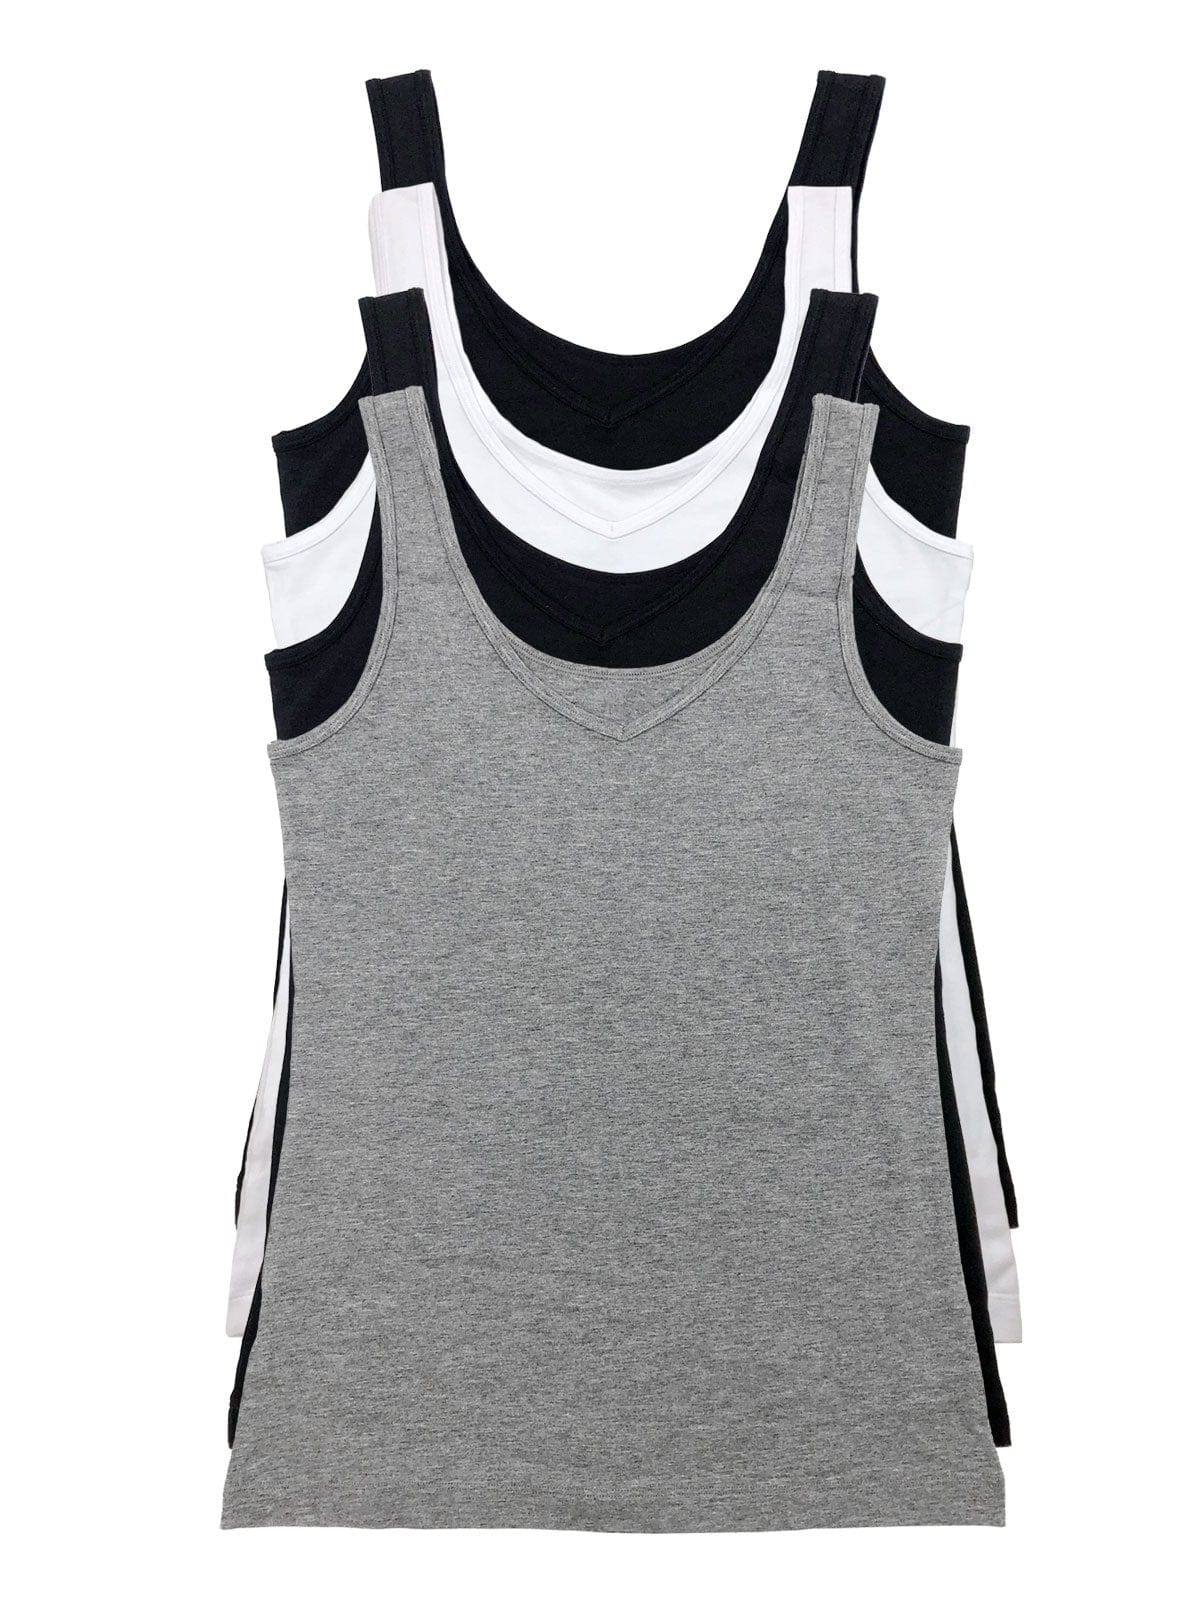 Image of Cotton Modal Reversible Tank Top 4-Pack